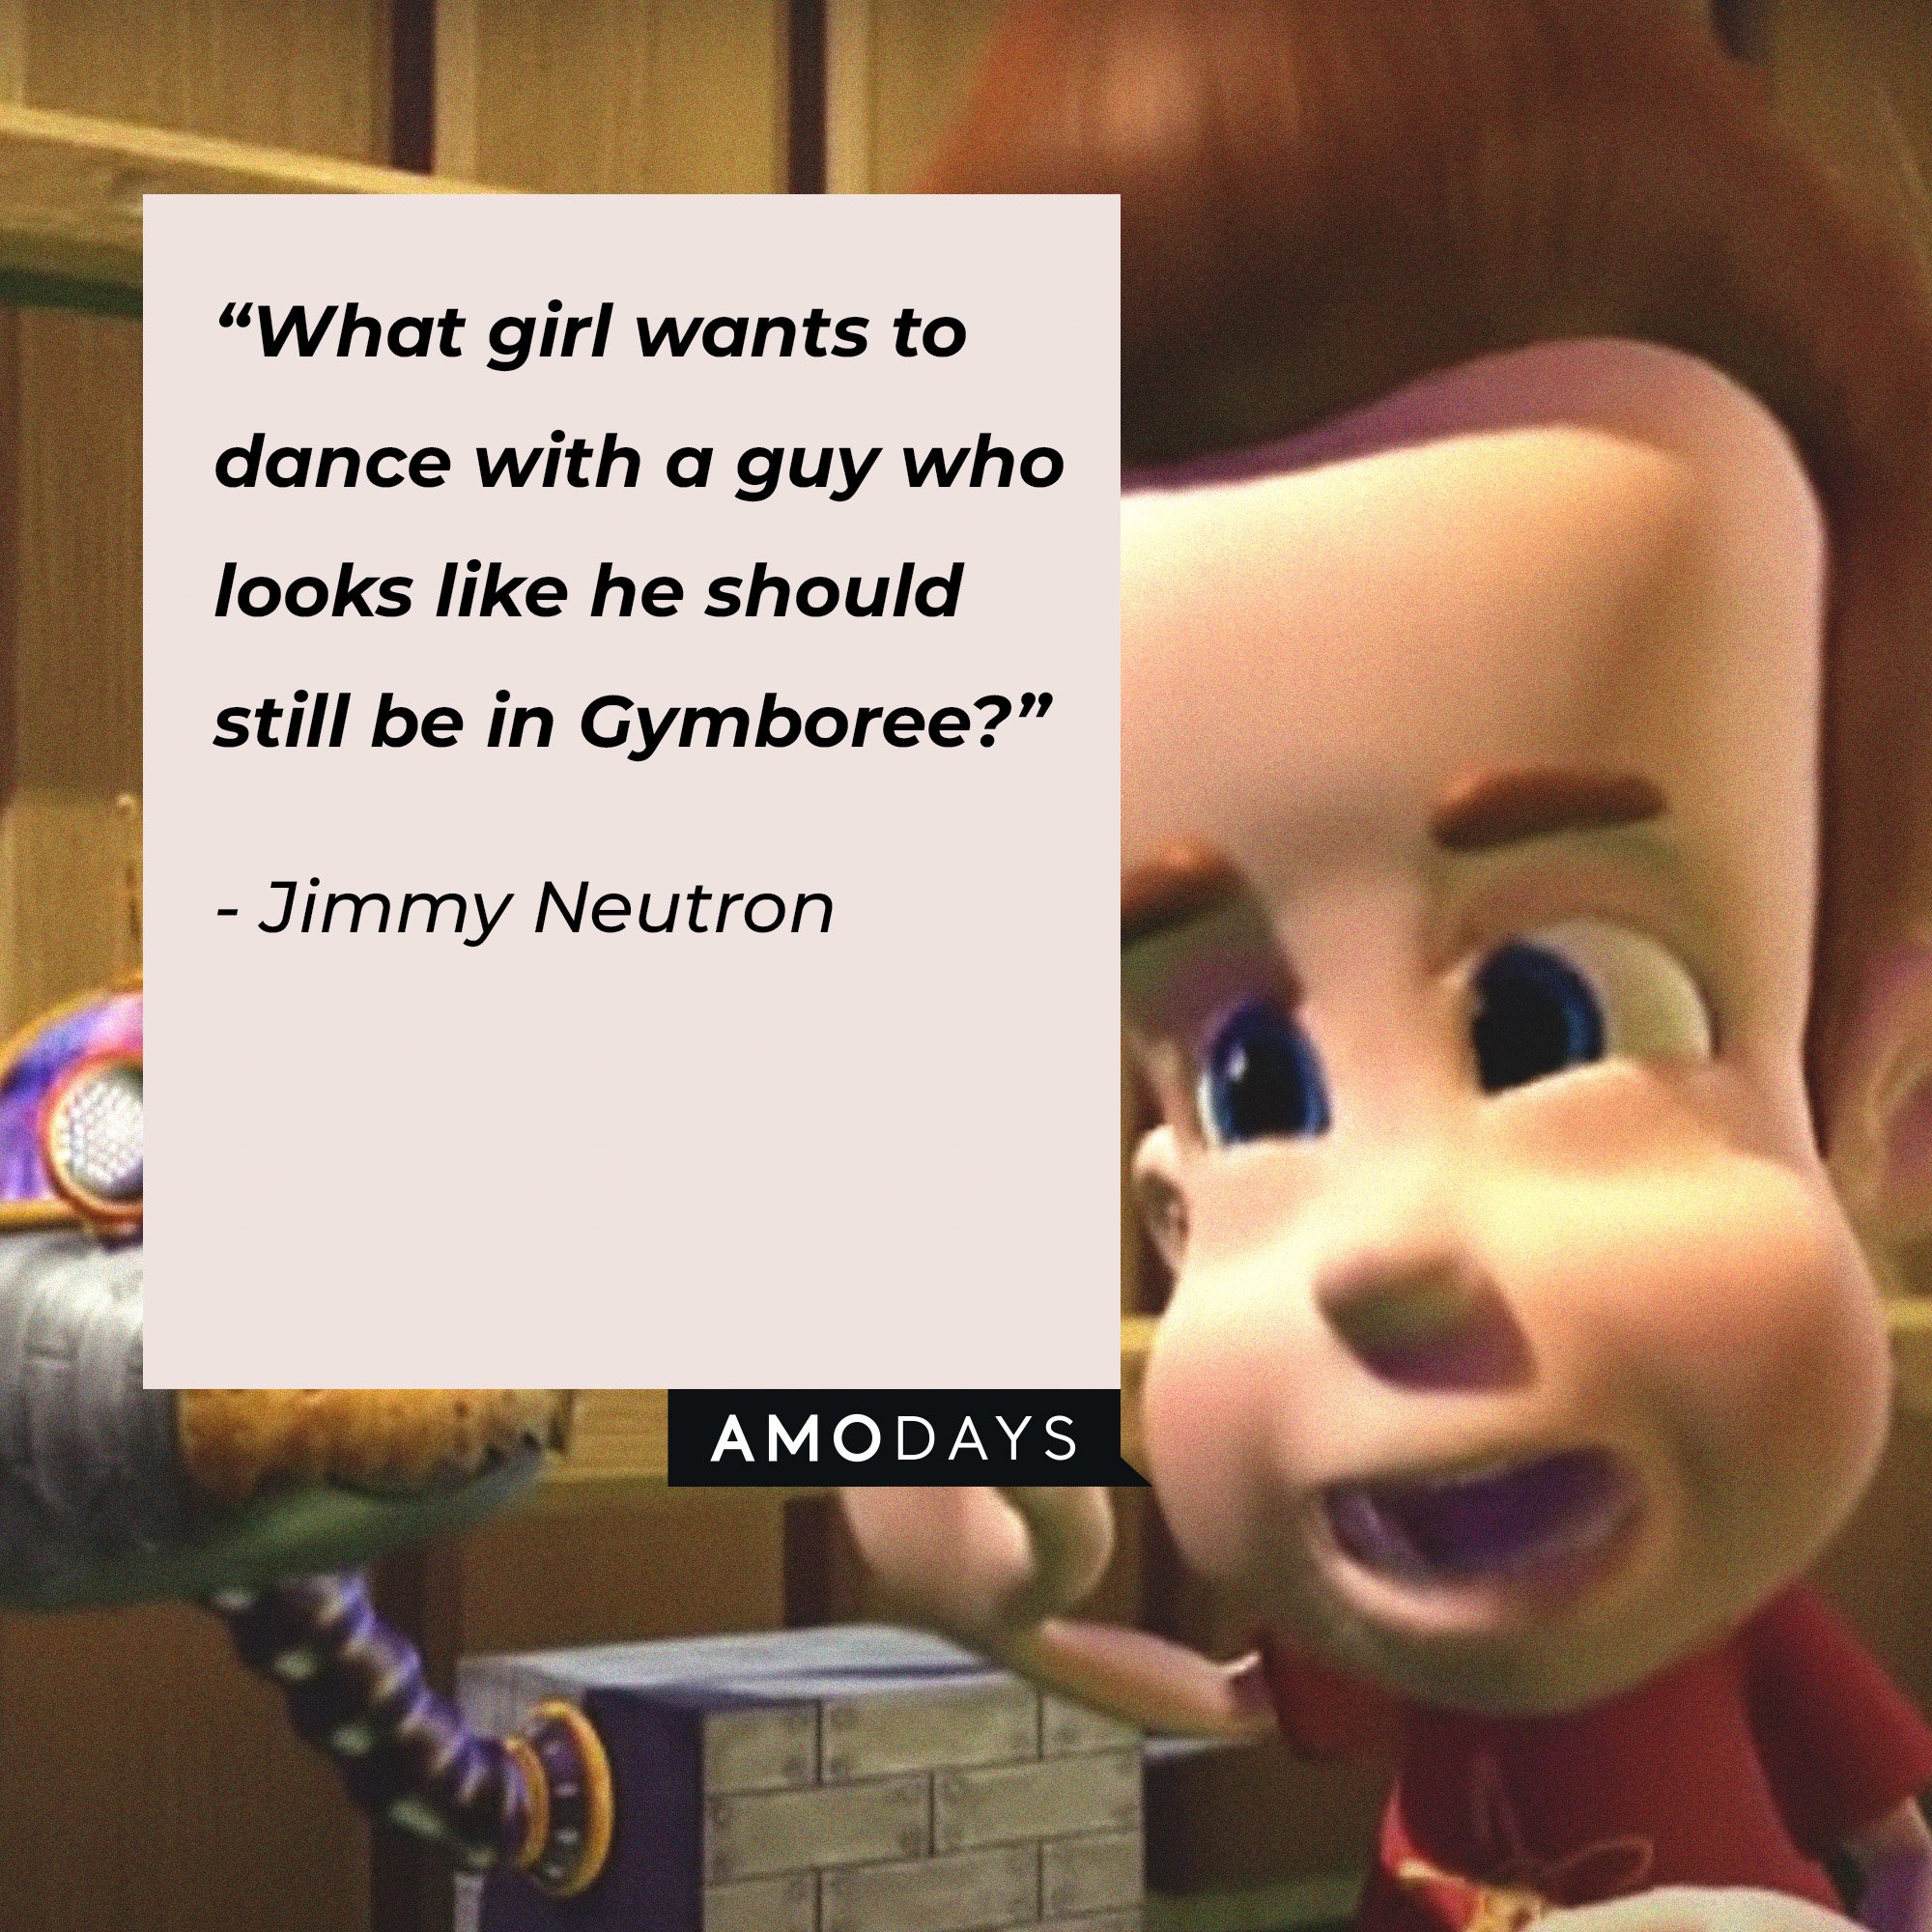 Jimmy Neutron’s quote: “What girl wants to dance with a guy who looks like he should still be in Gymboree?” | Image: AmoDays